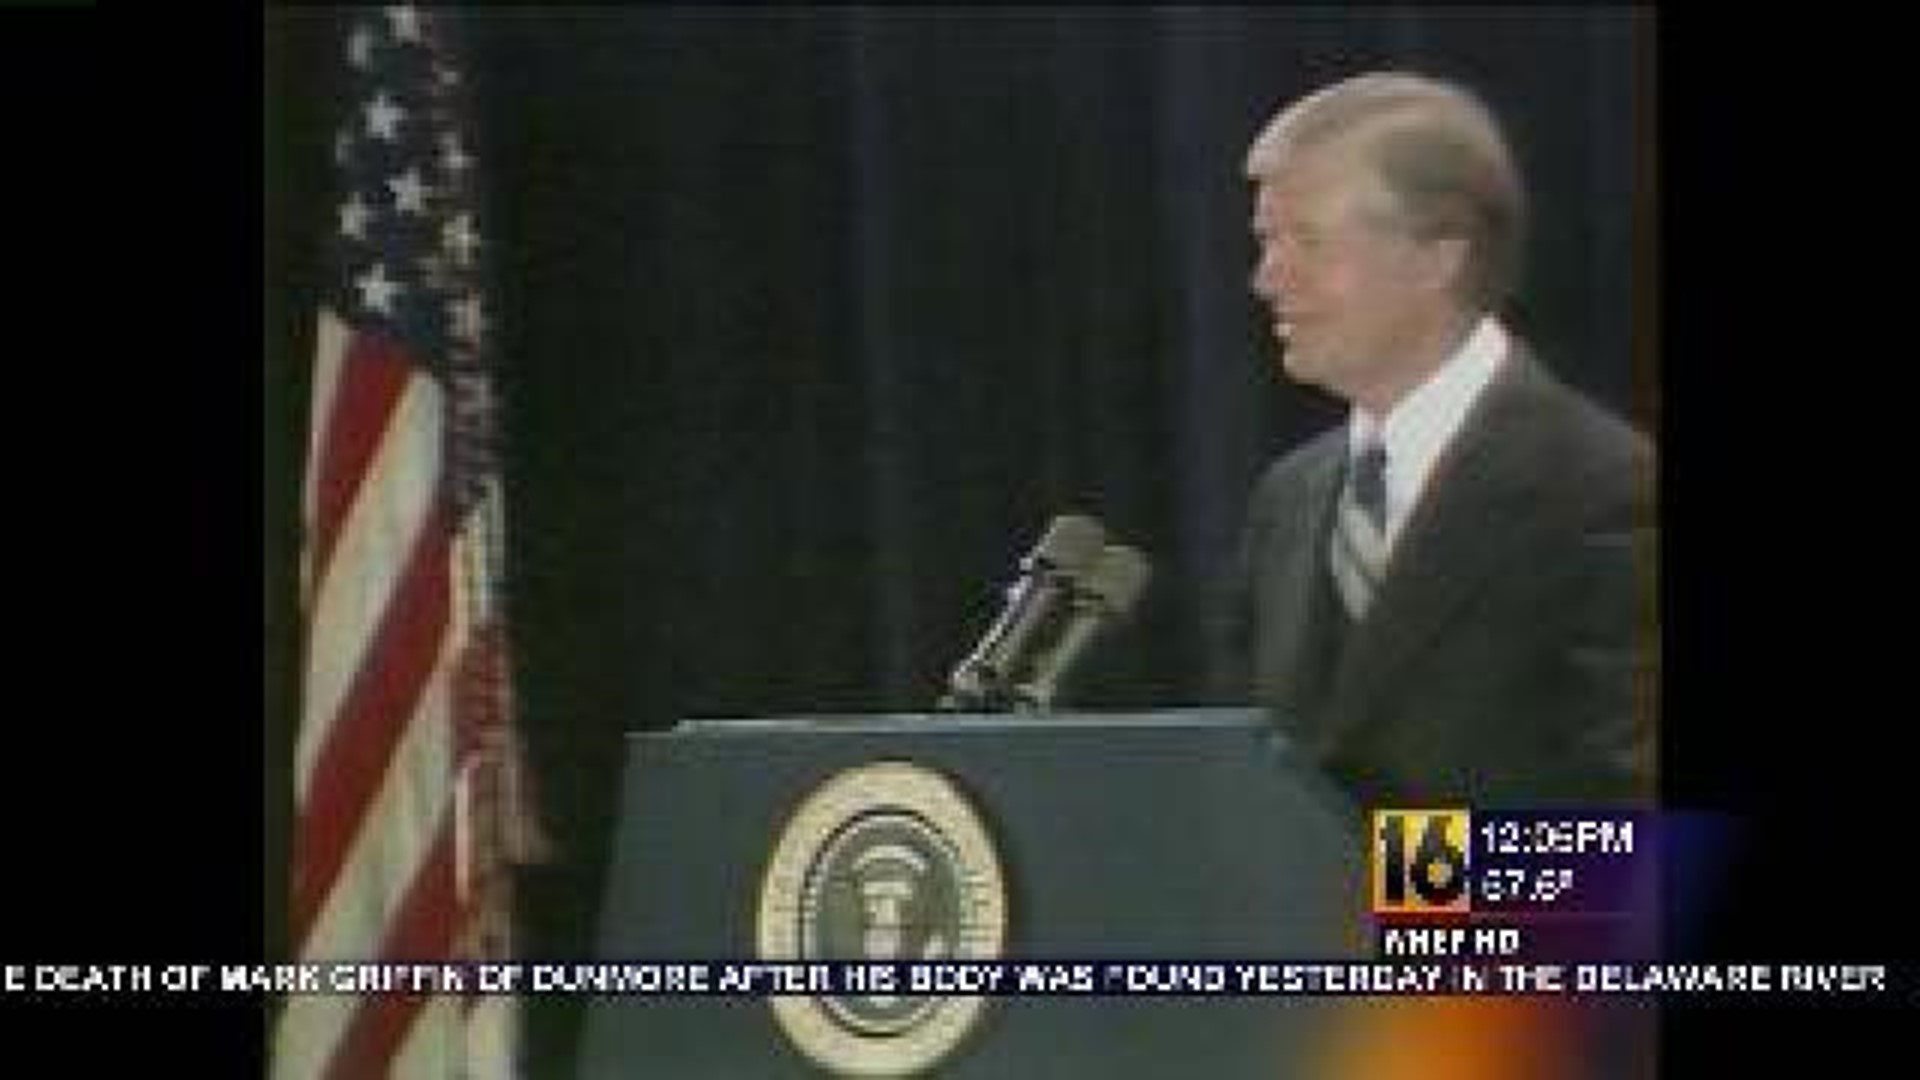 President Carter to Visit Luzerne County